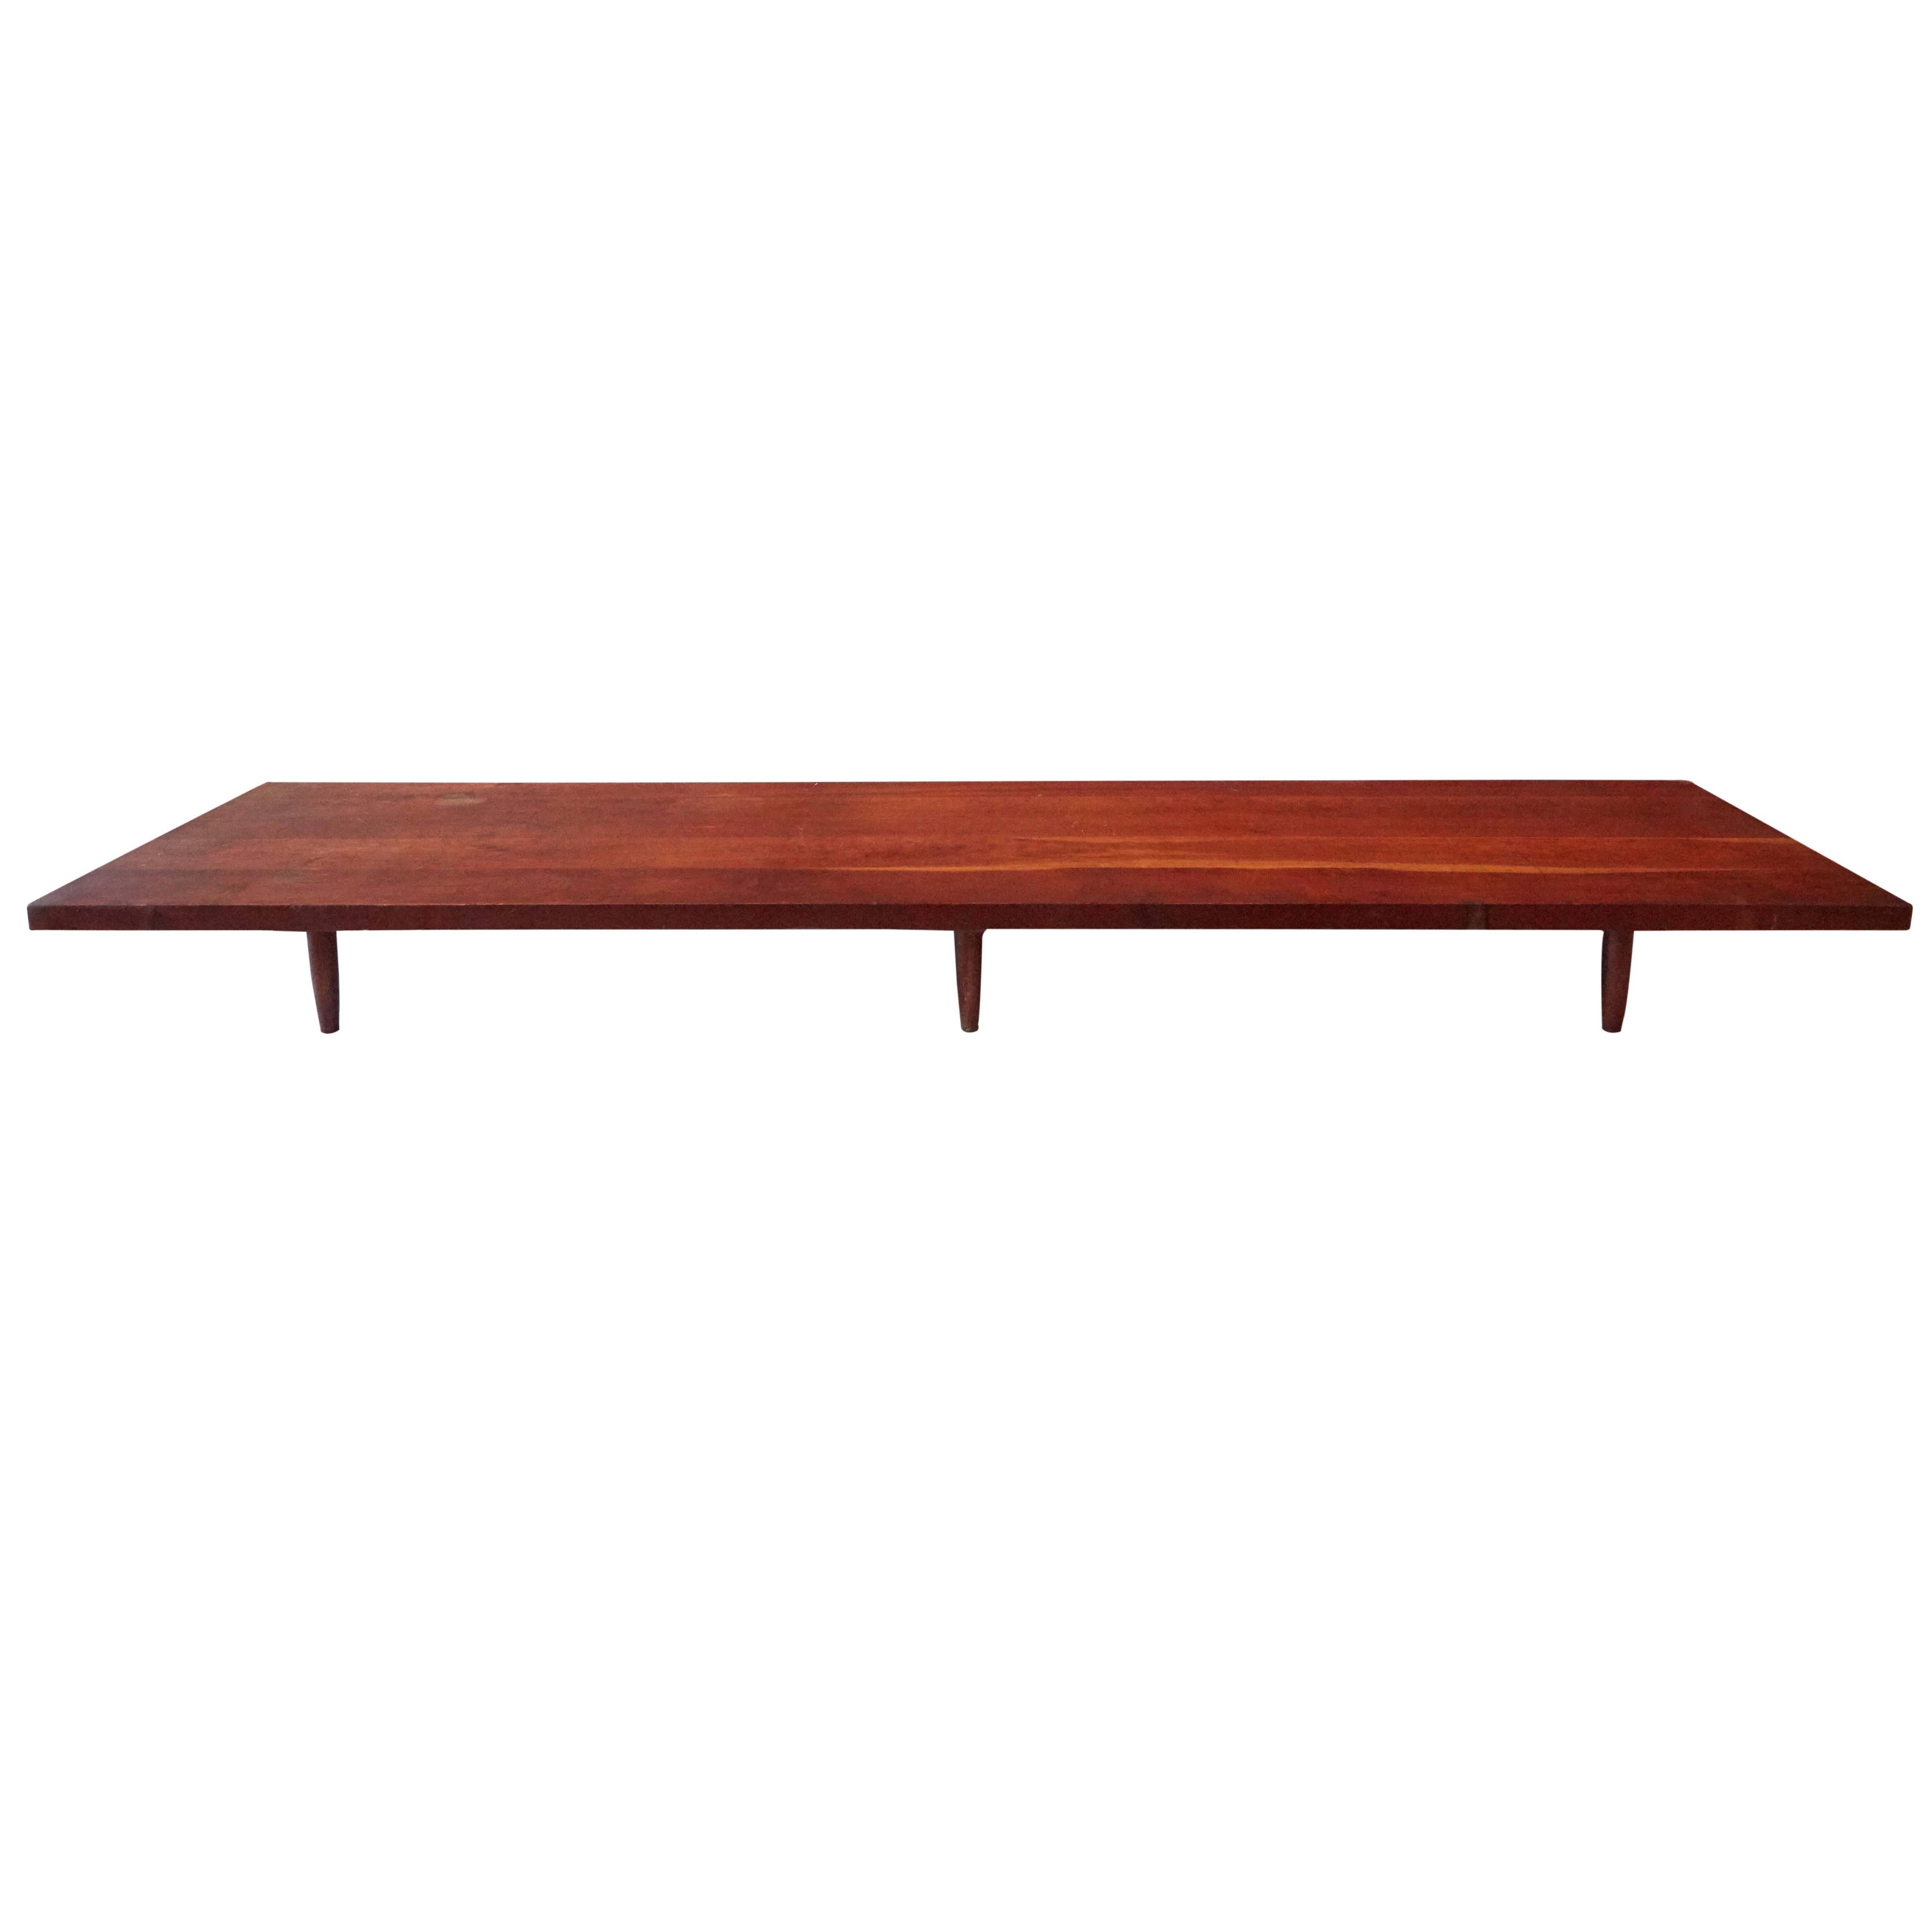 Long Low Cherry Table by George Nakashima, New Hope, Pennsylvania, 1956